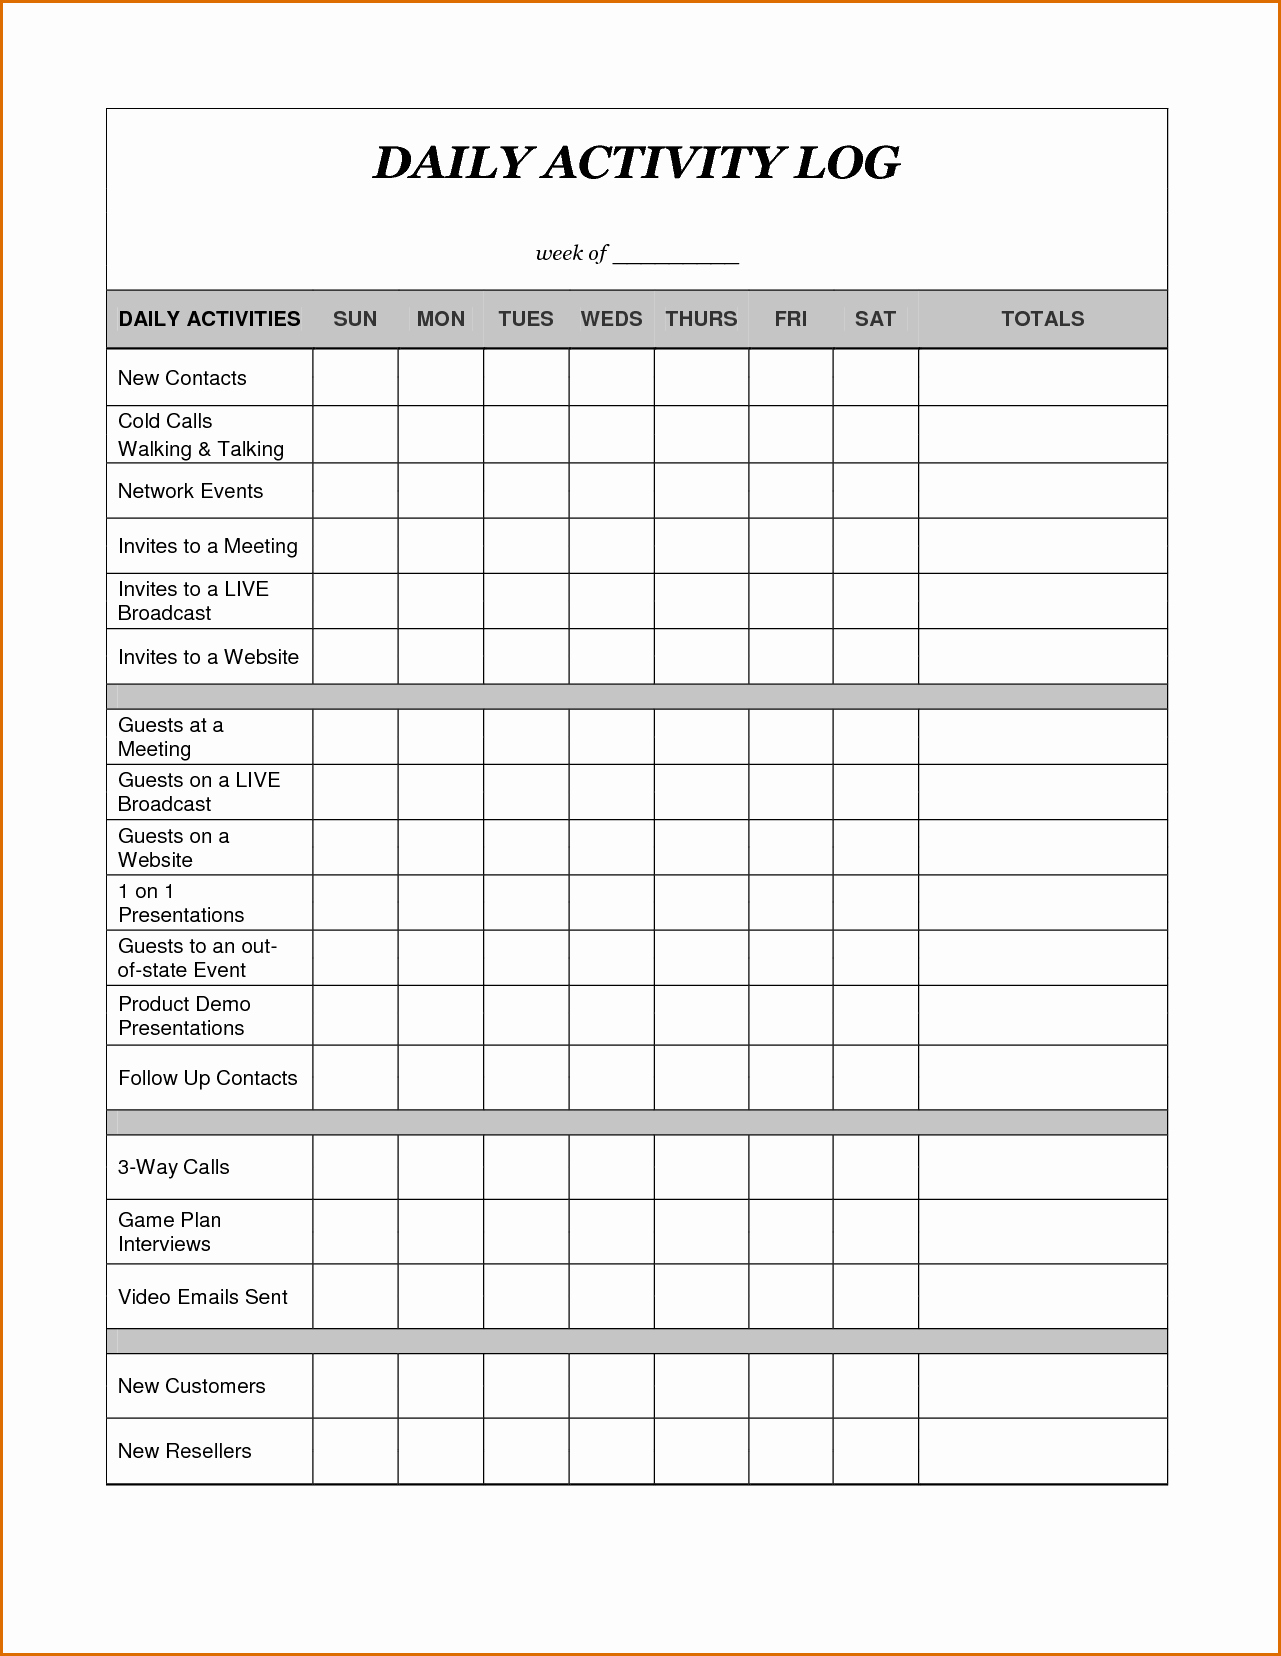 Daily Activity Log Template Excel Unique 8 Daily Activity Log Template